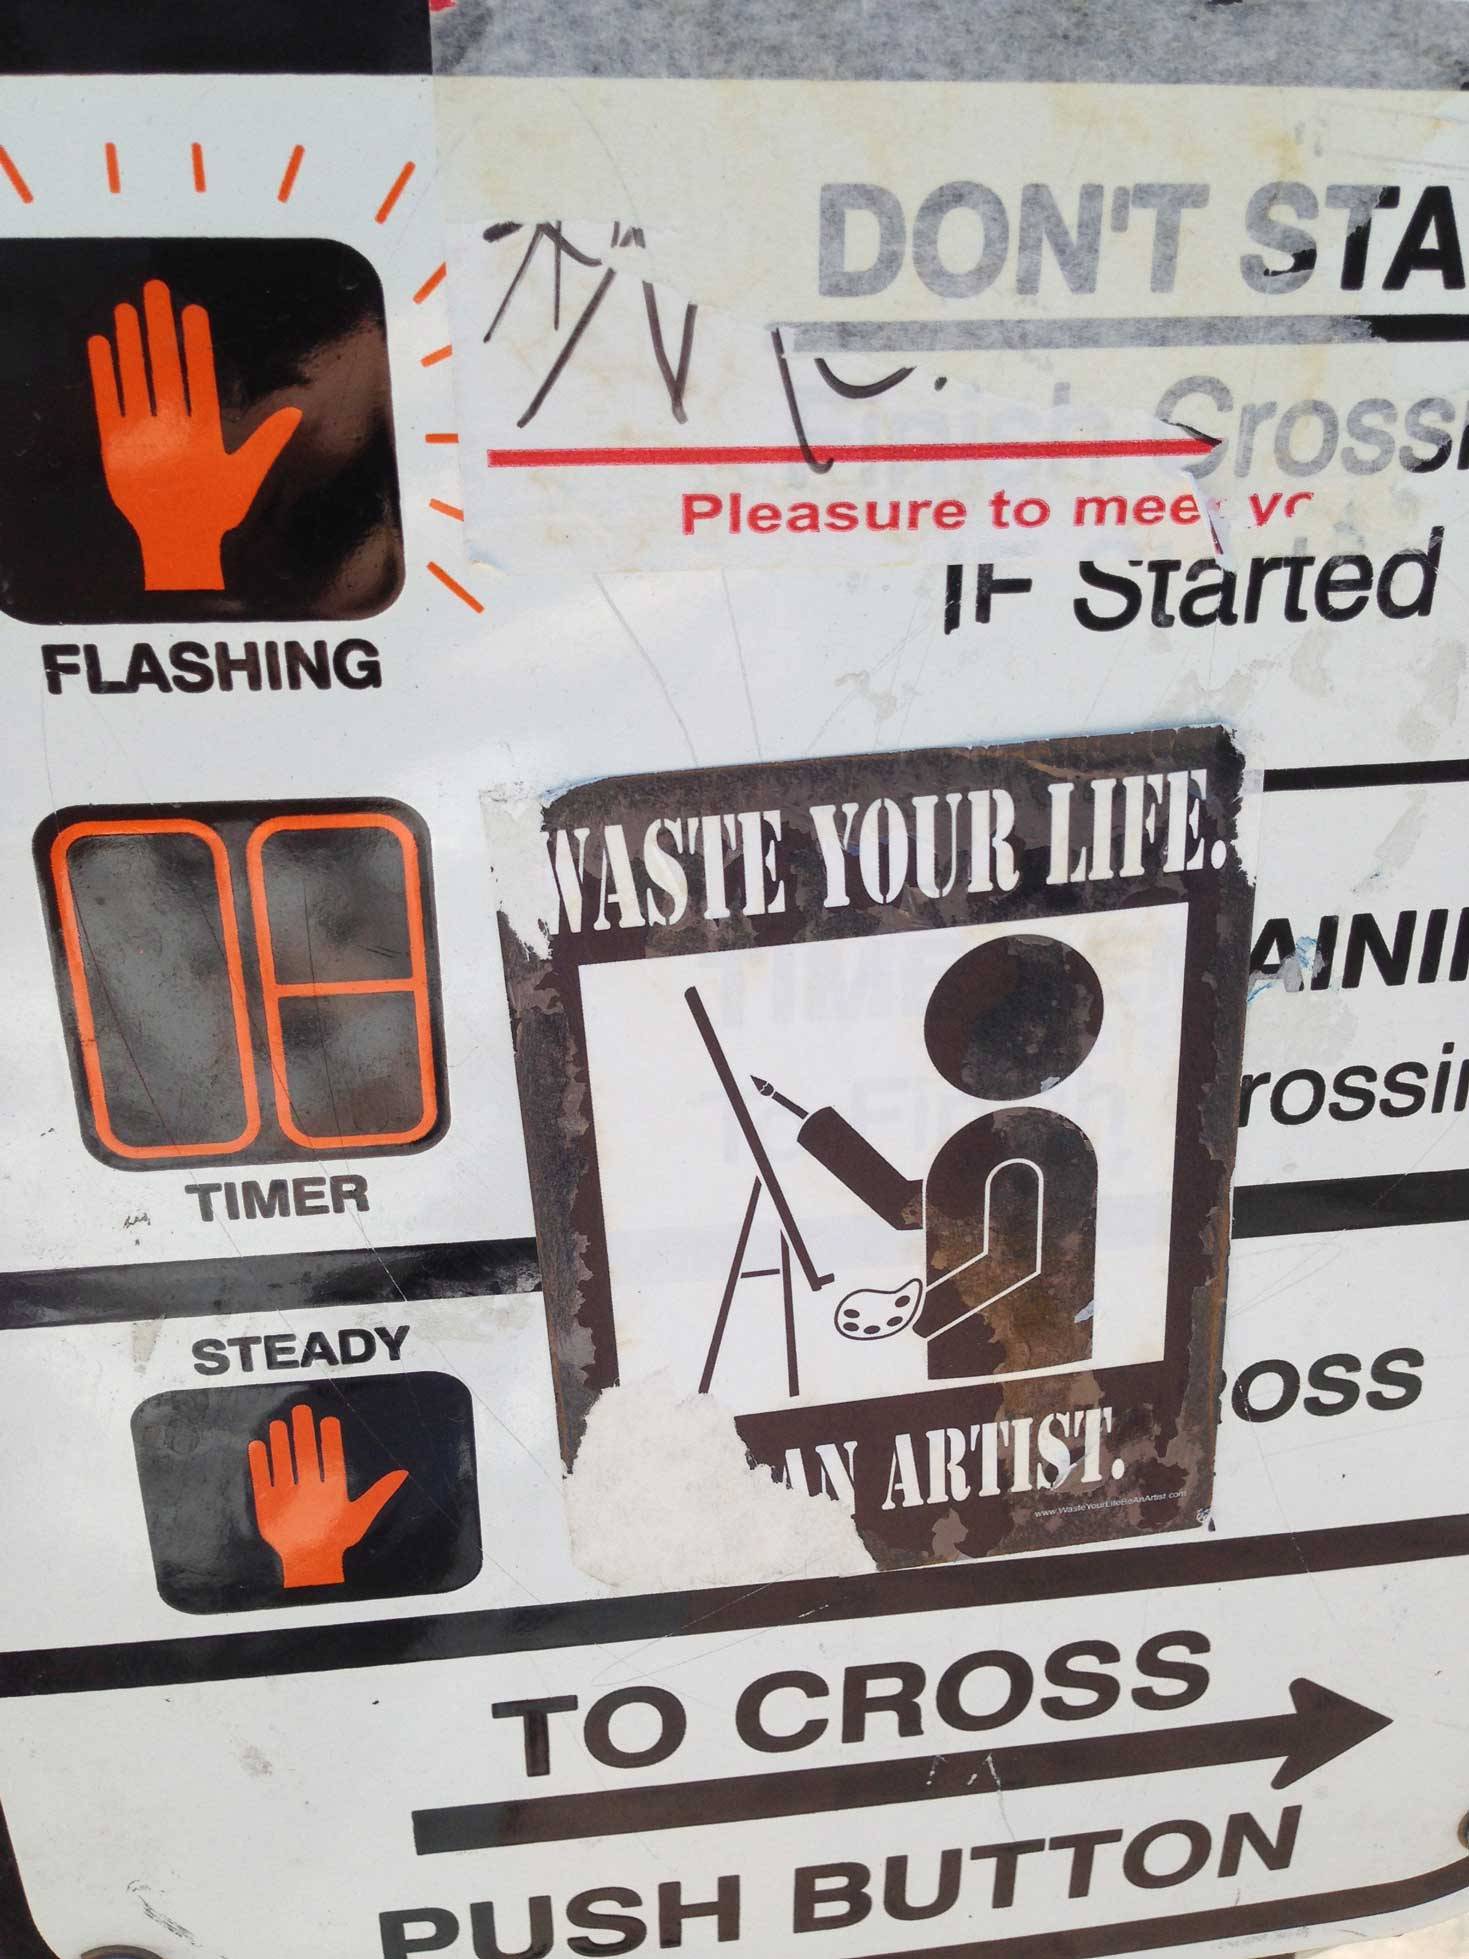 Traffic light sign with a sticker “Waste your life. Become an artist.”